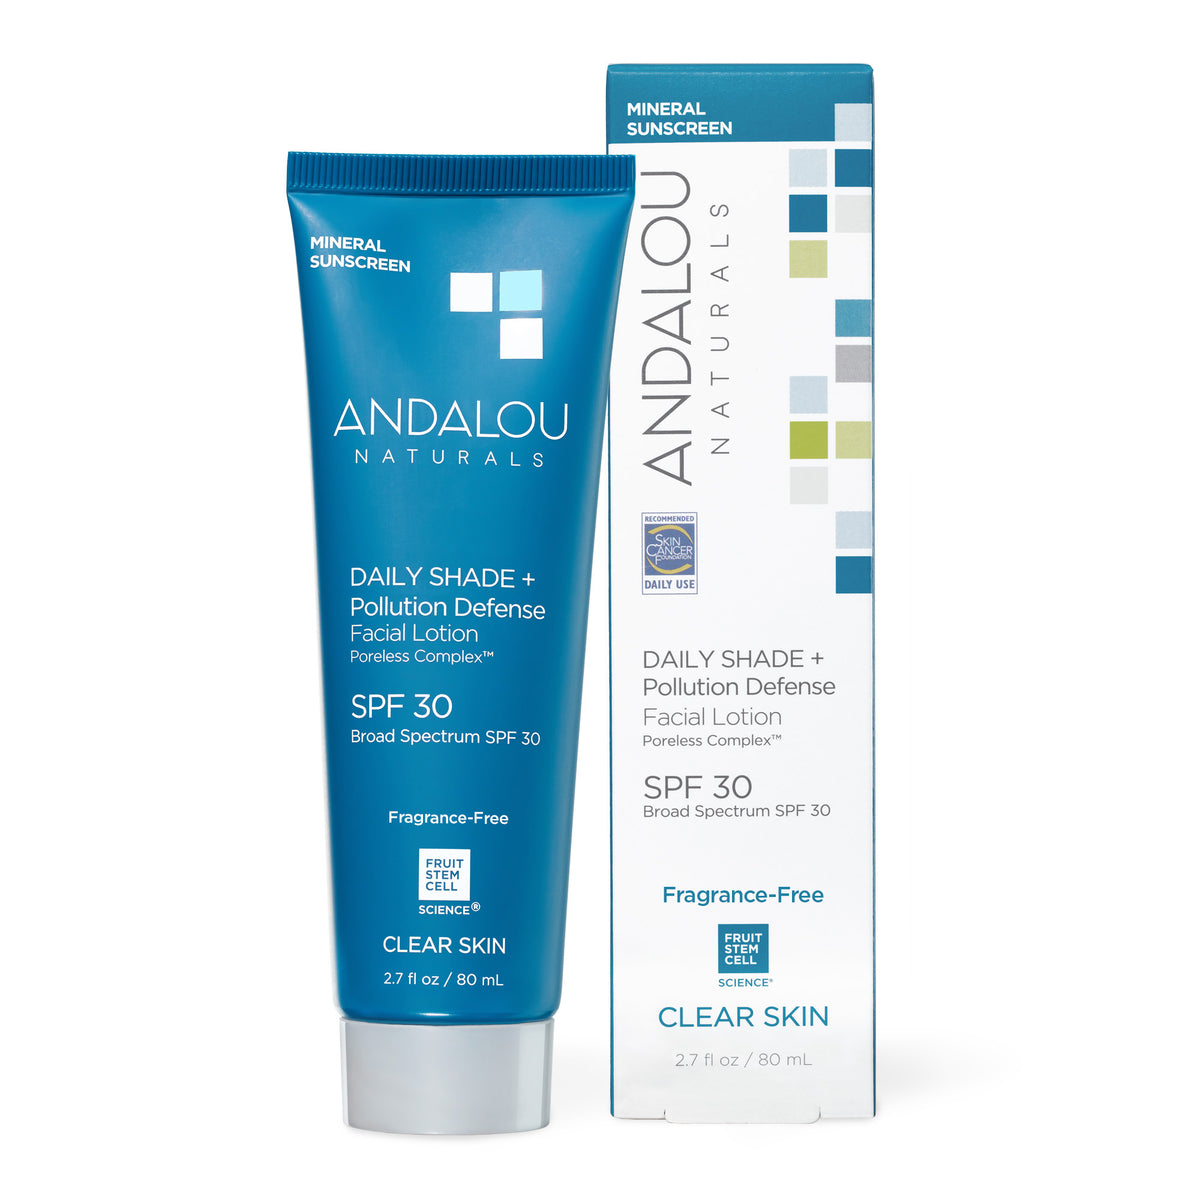 Clear Skin Daily Shade Pollution Defense Mineral Sunscreen SPF 30 - Andalou Naturals US